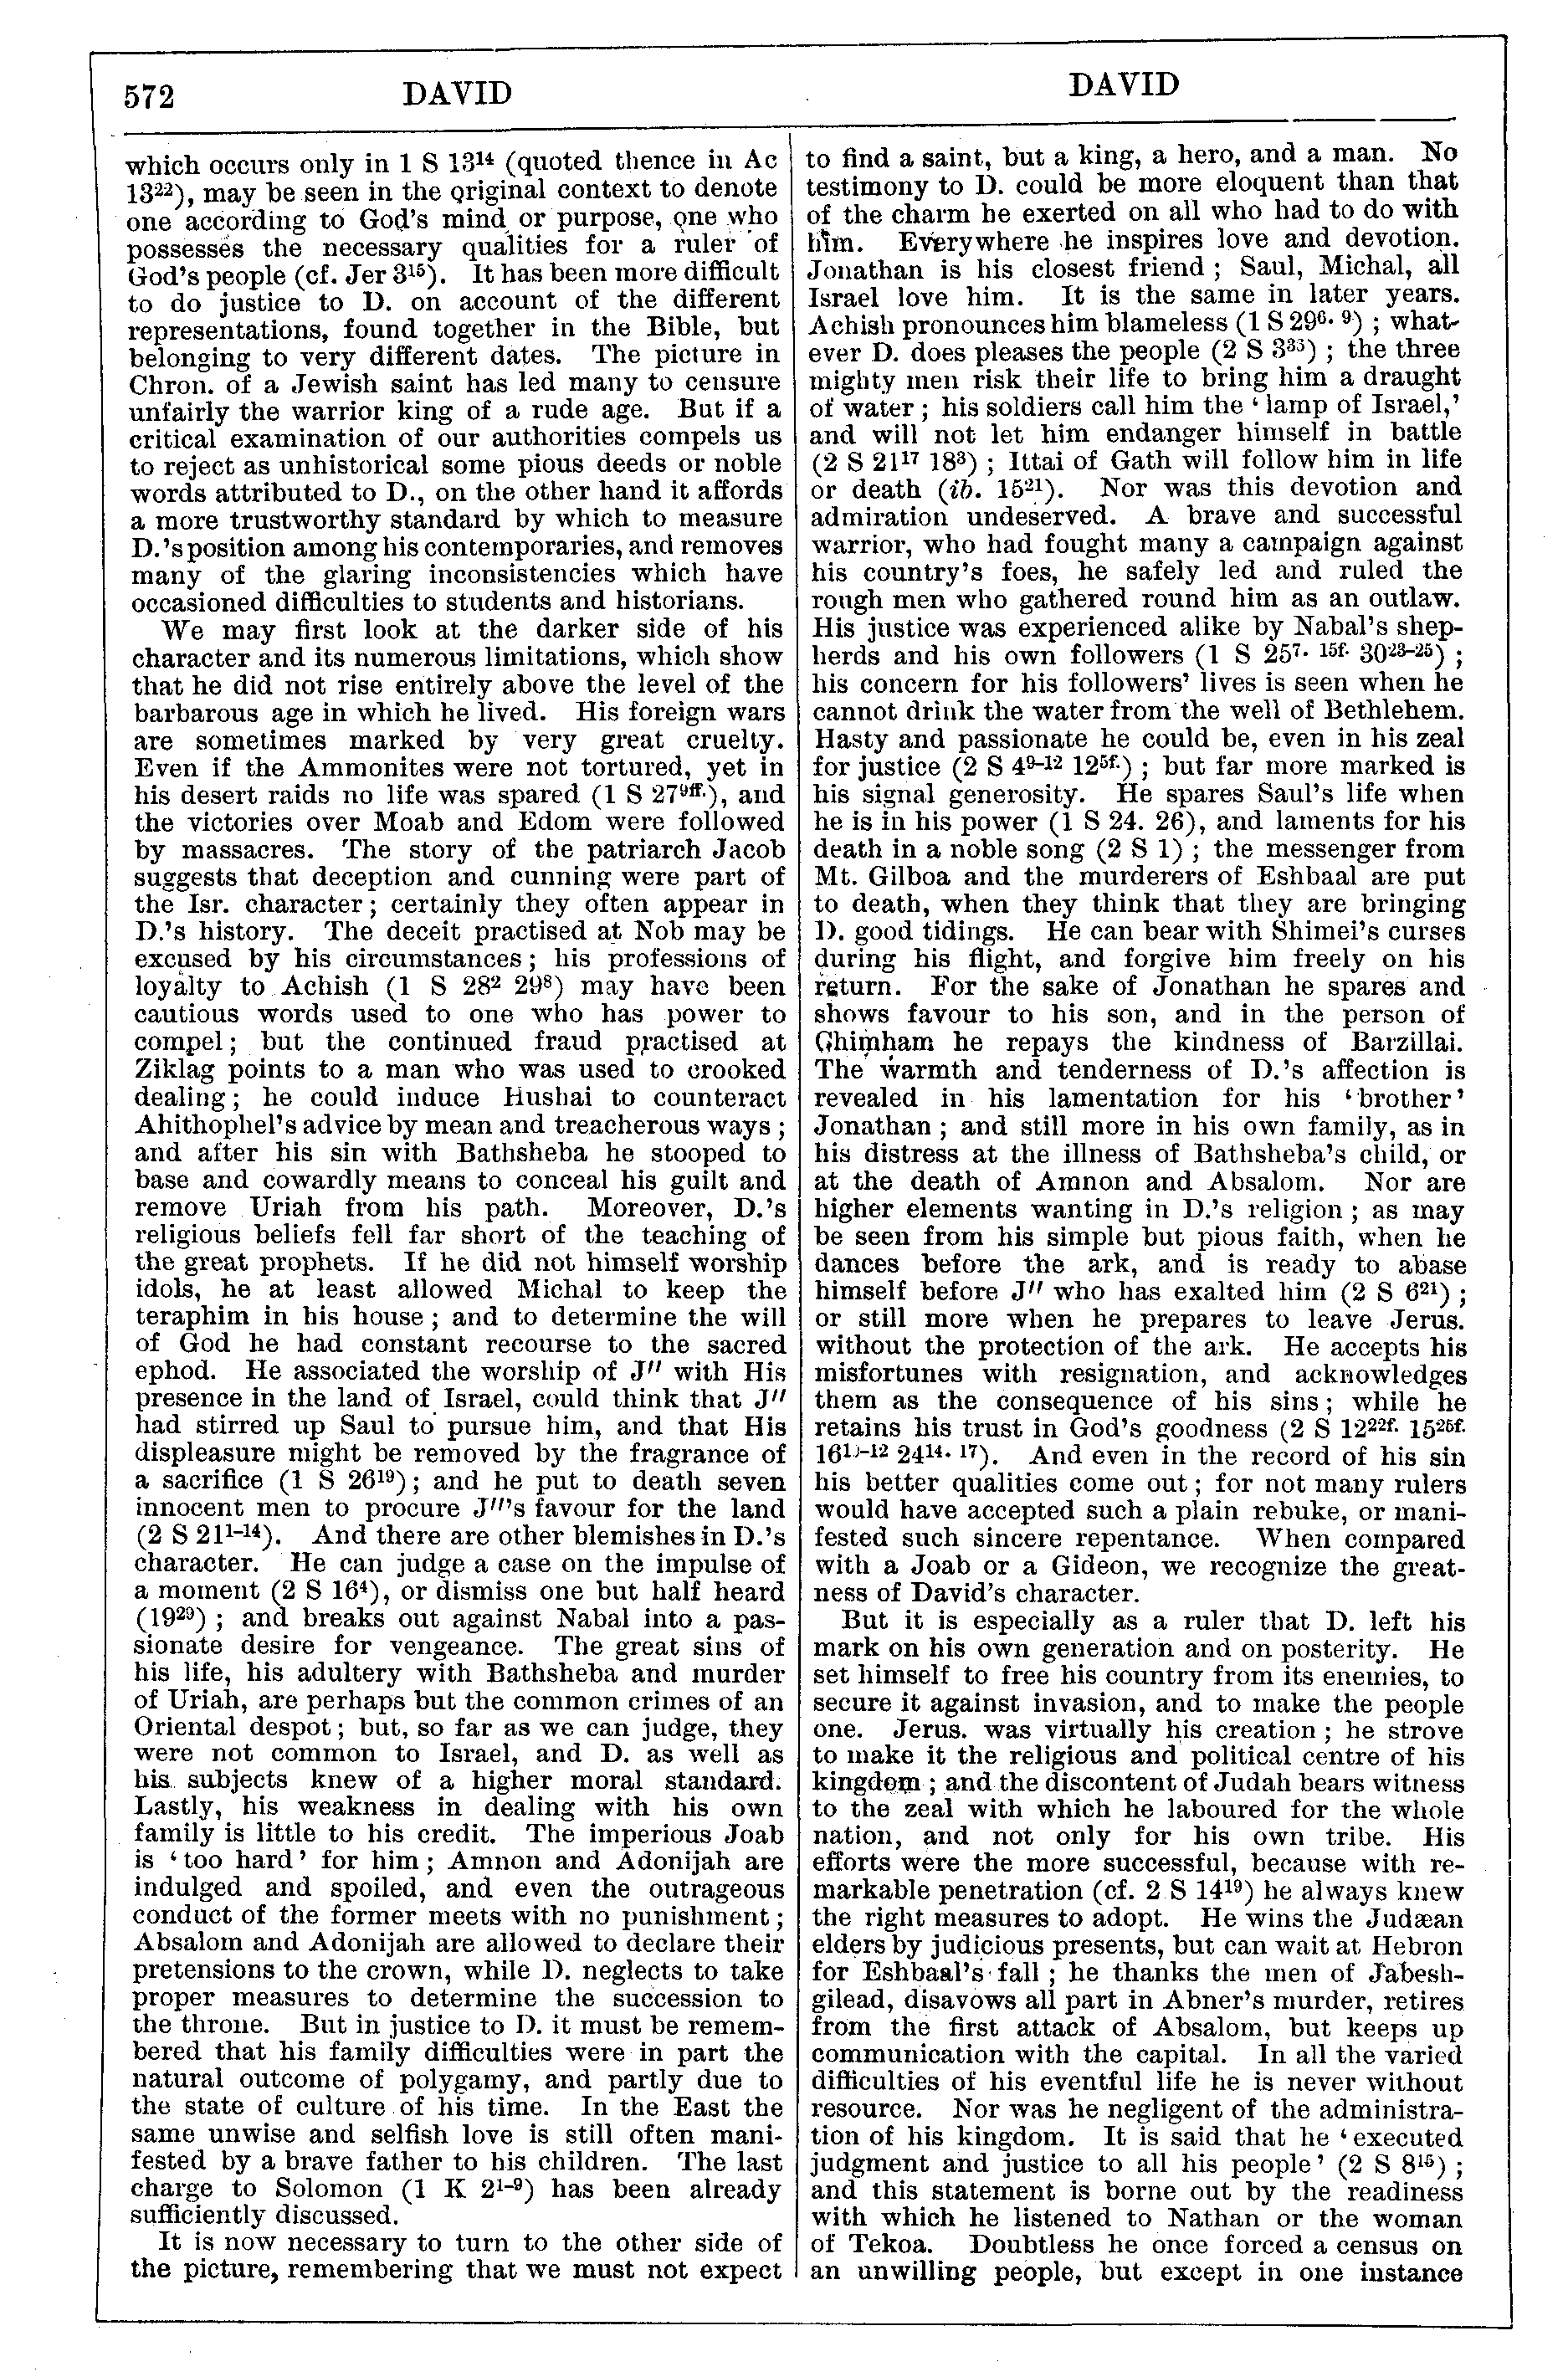 Image of page 572